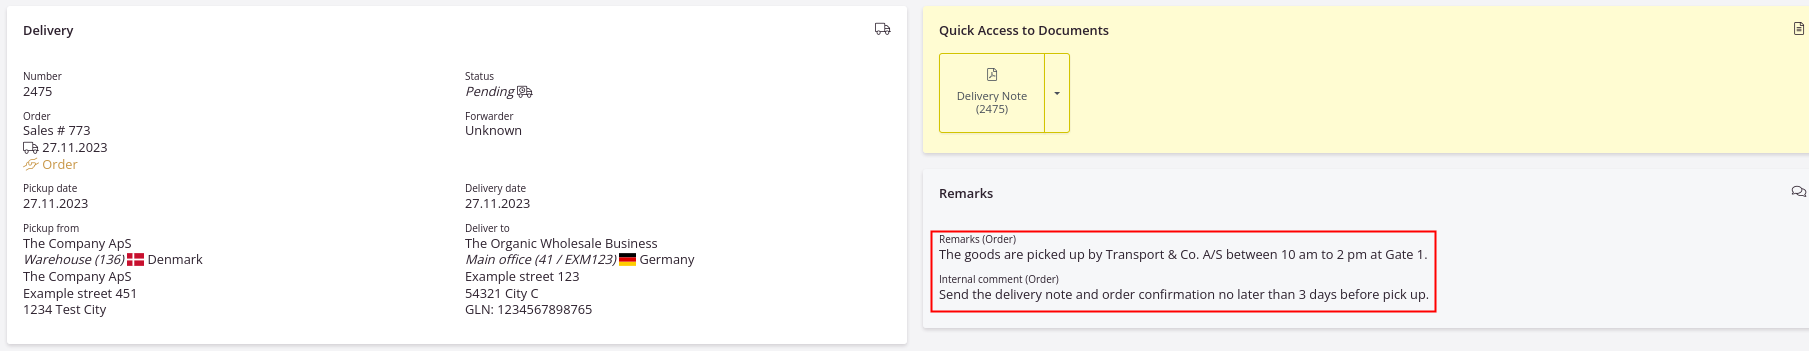 Order comment and internal remark in the delivery view